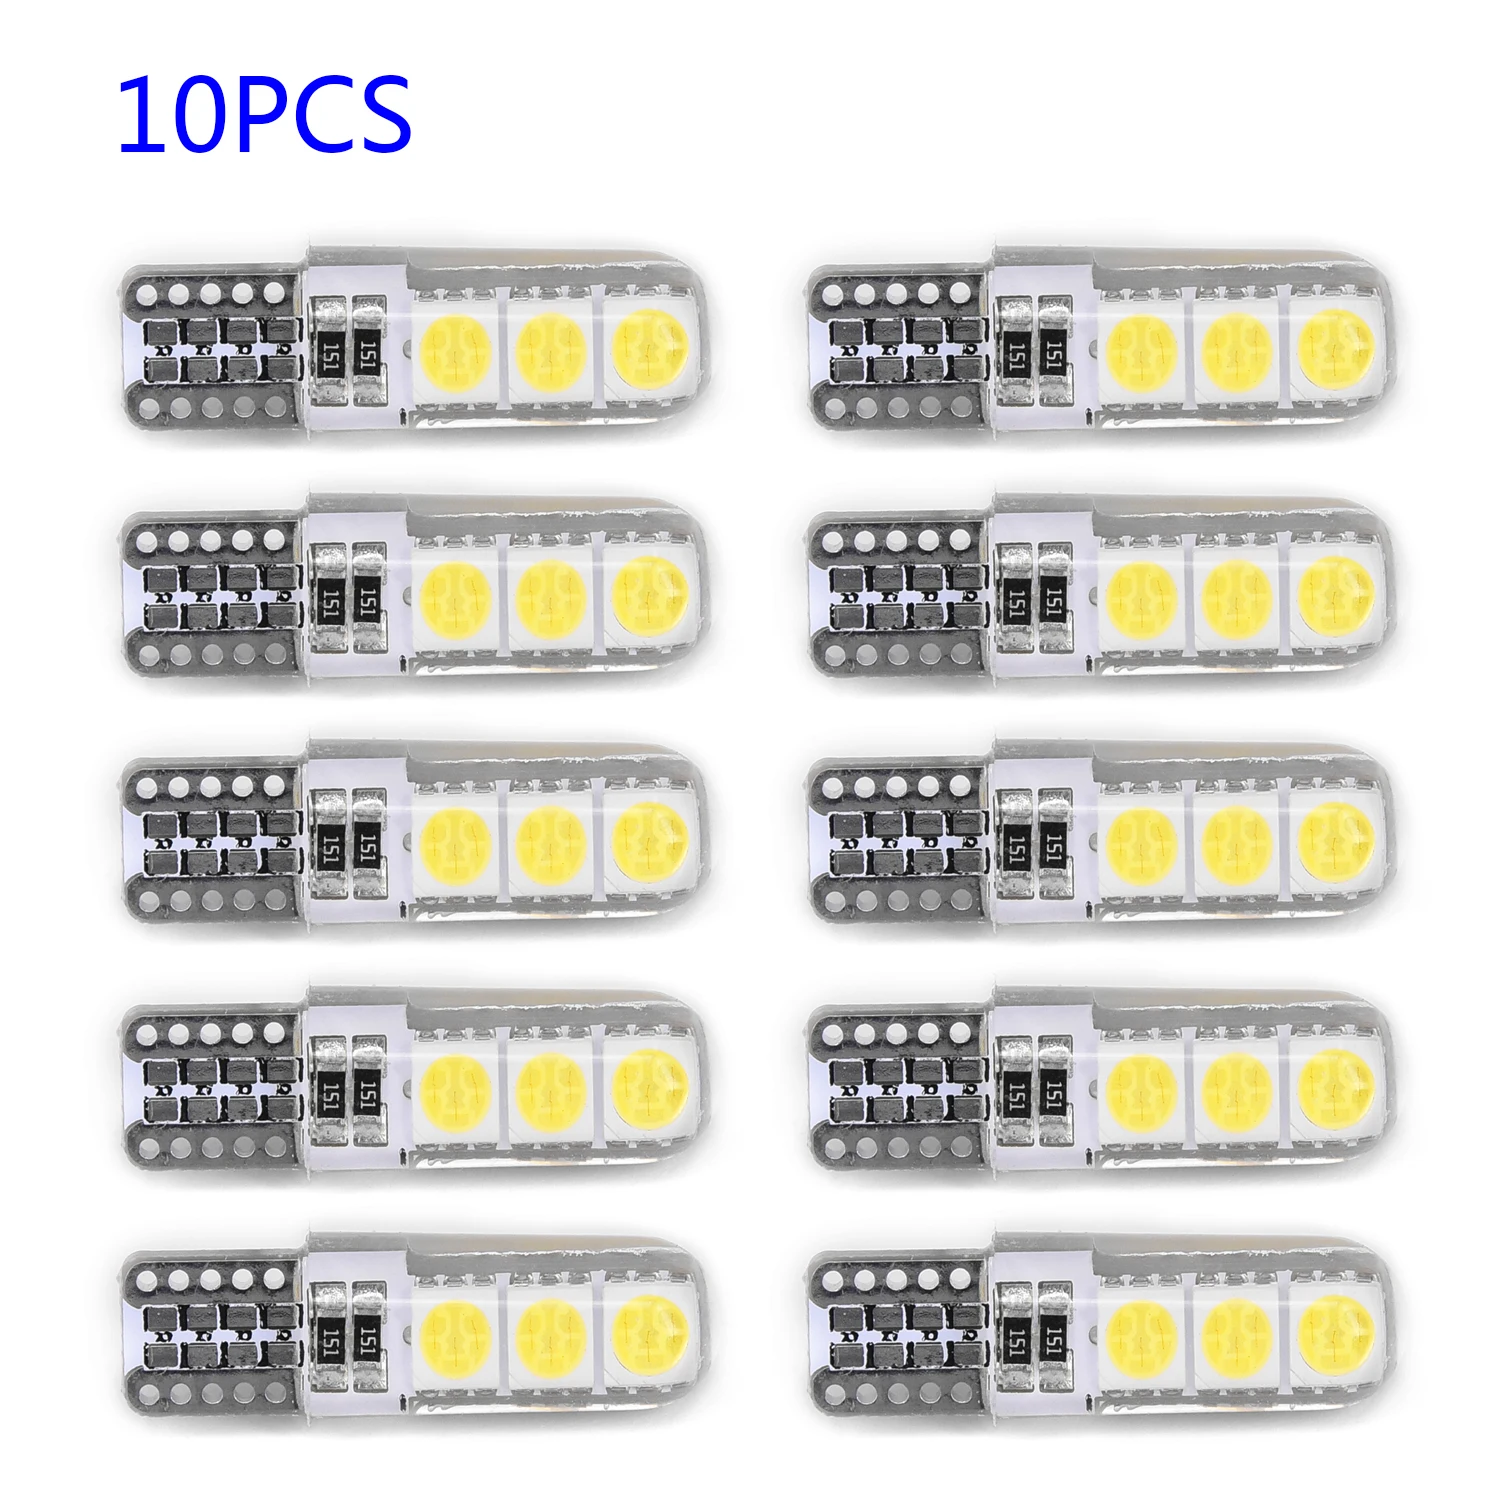 

Silicone Shell Canbus LED Lamp White 12V DC License Plate Dome 10pcs T10 194 W5W Car T10-5050-6SMD Energy Saving